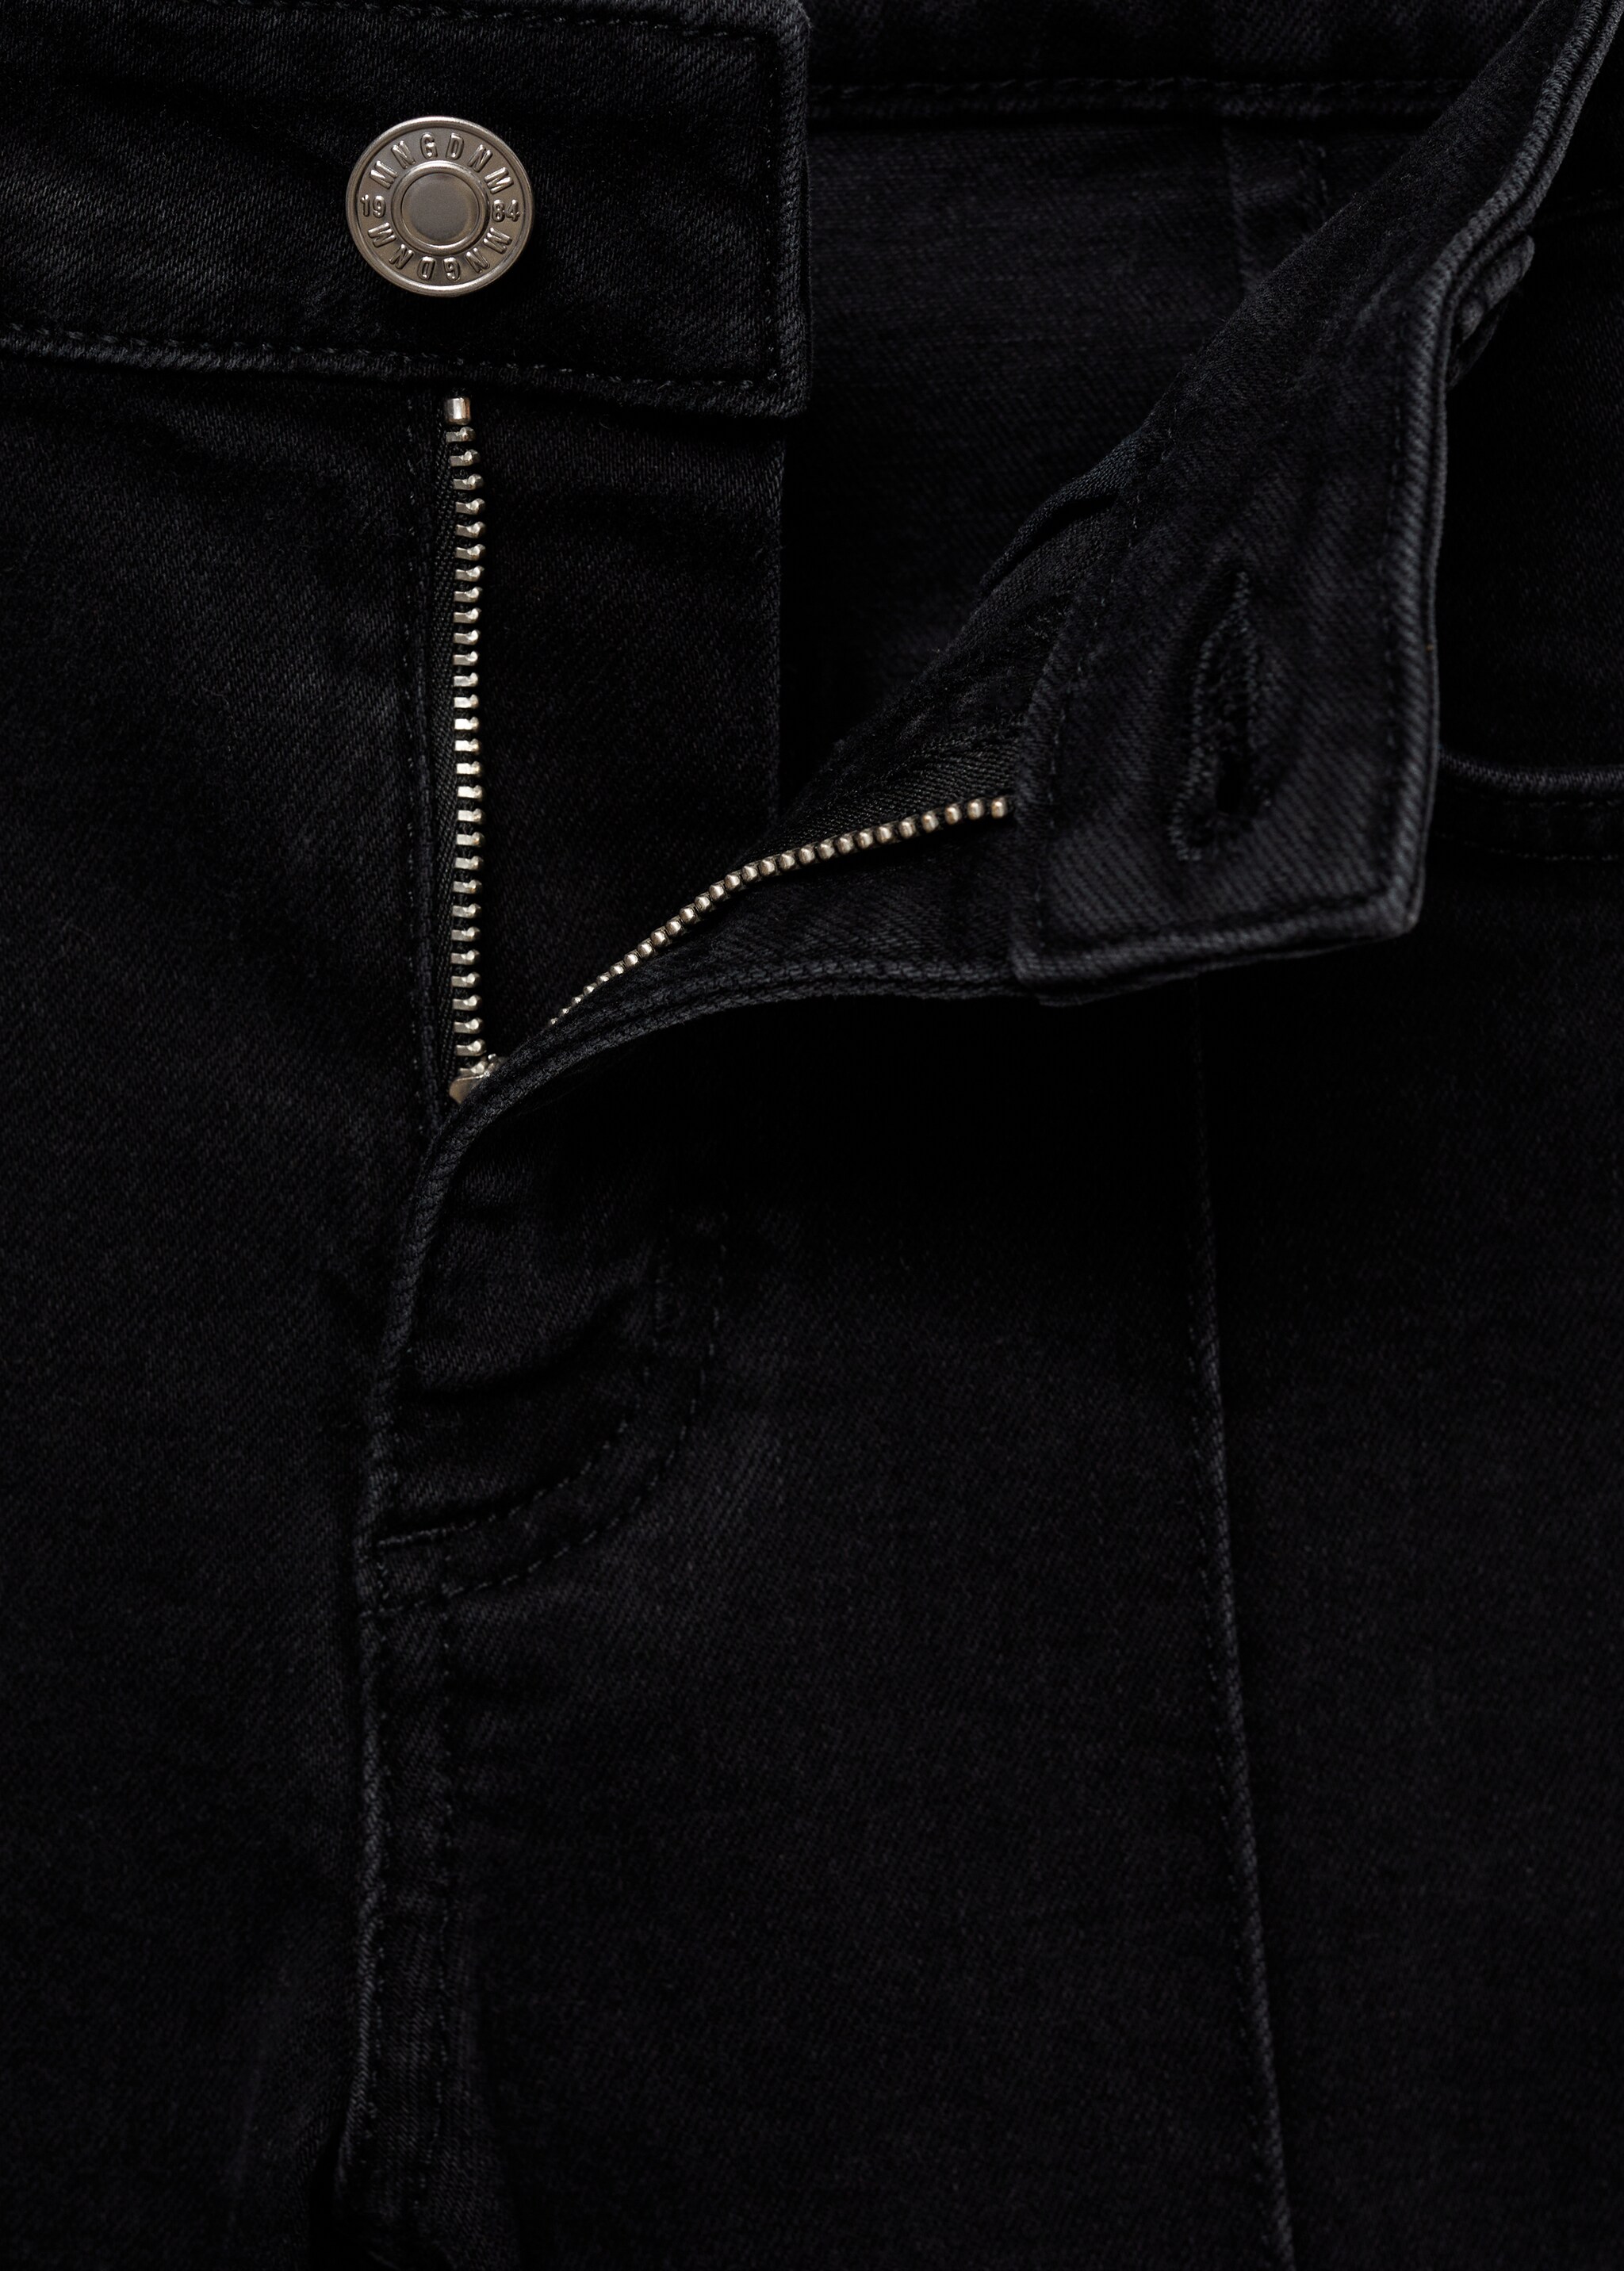 Slim capri jeans with decorative stitching - Details of the article 8